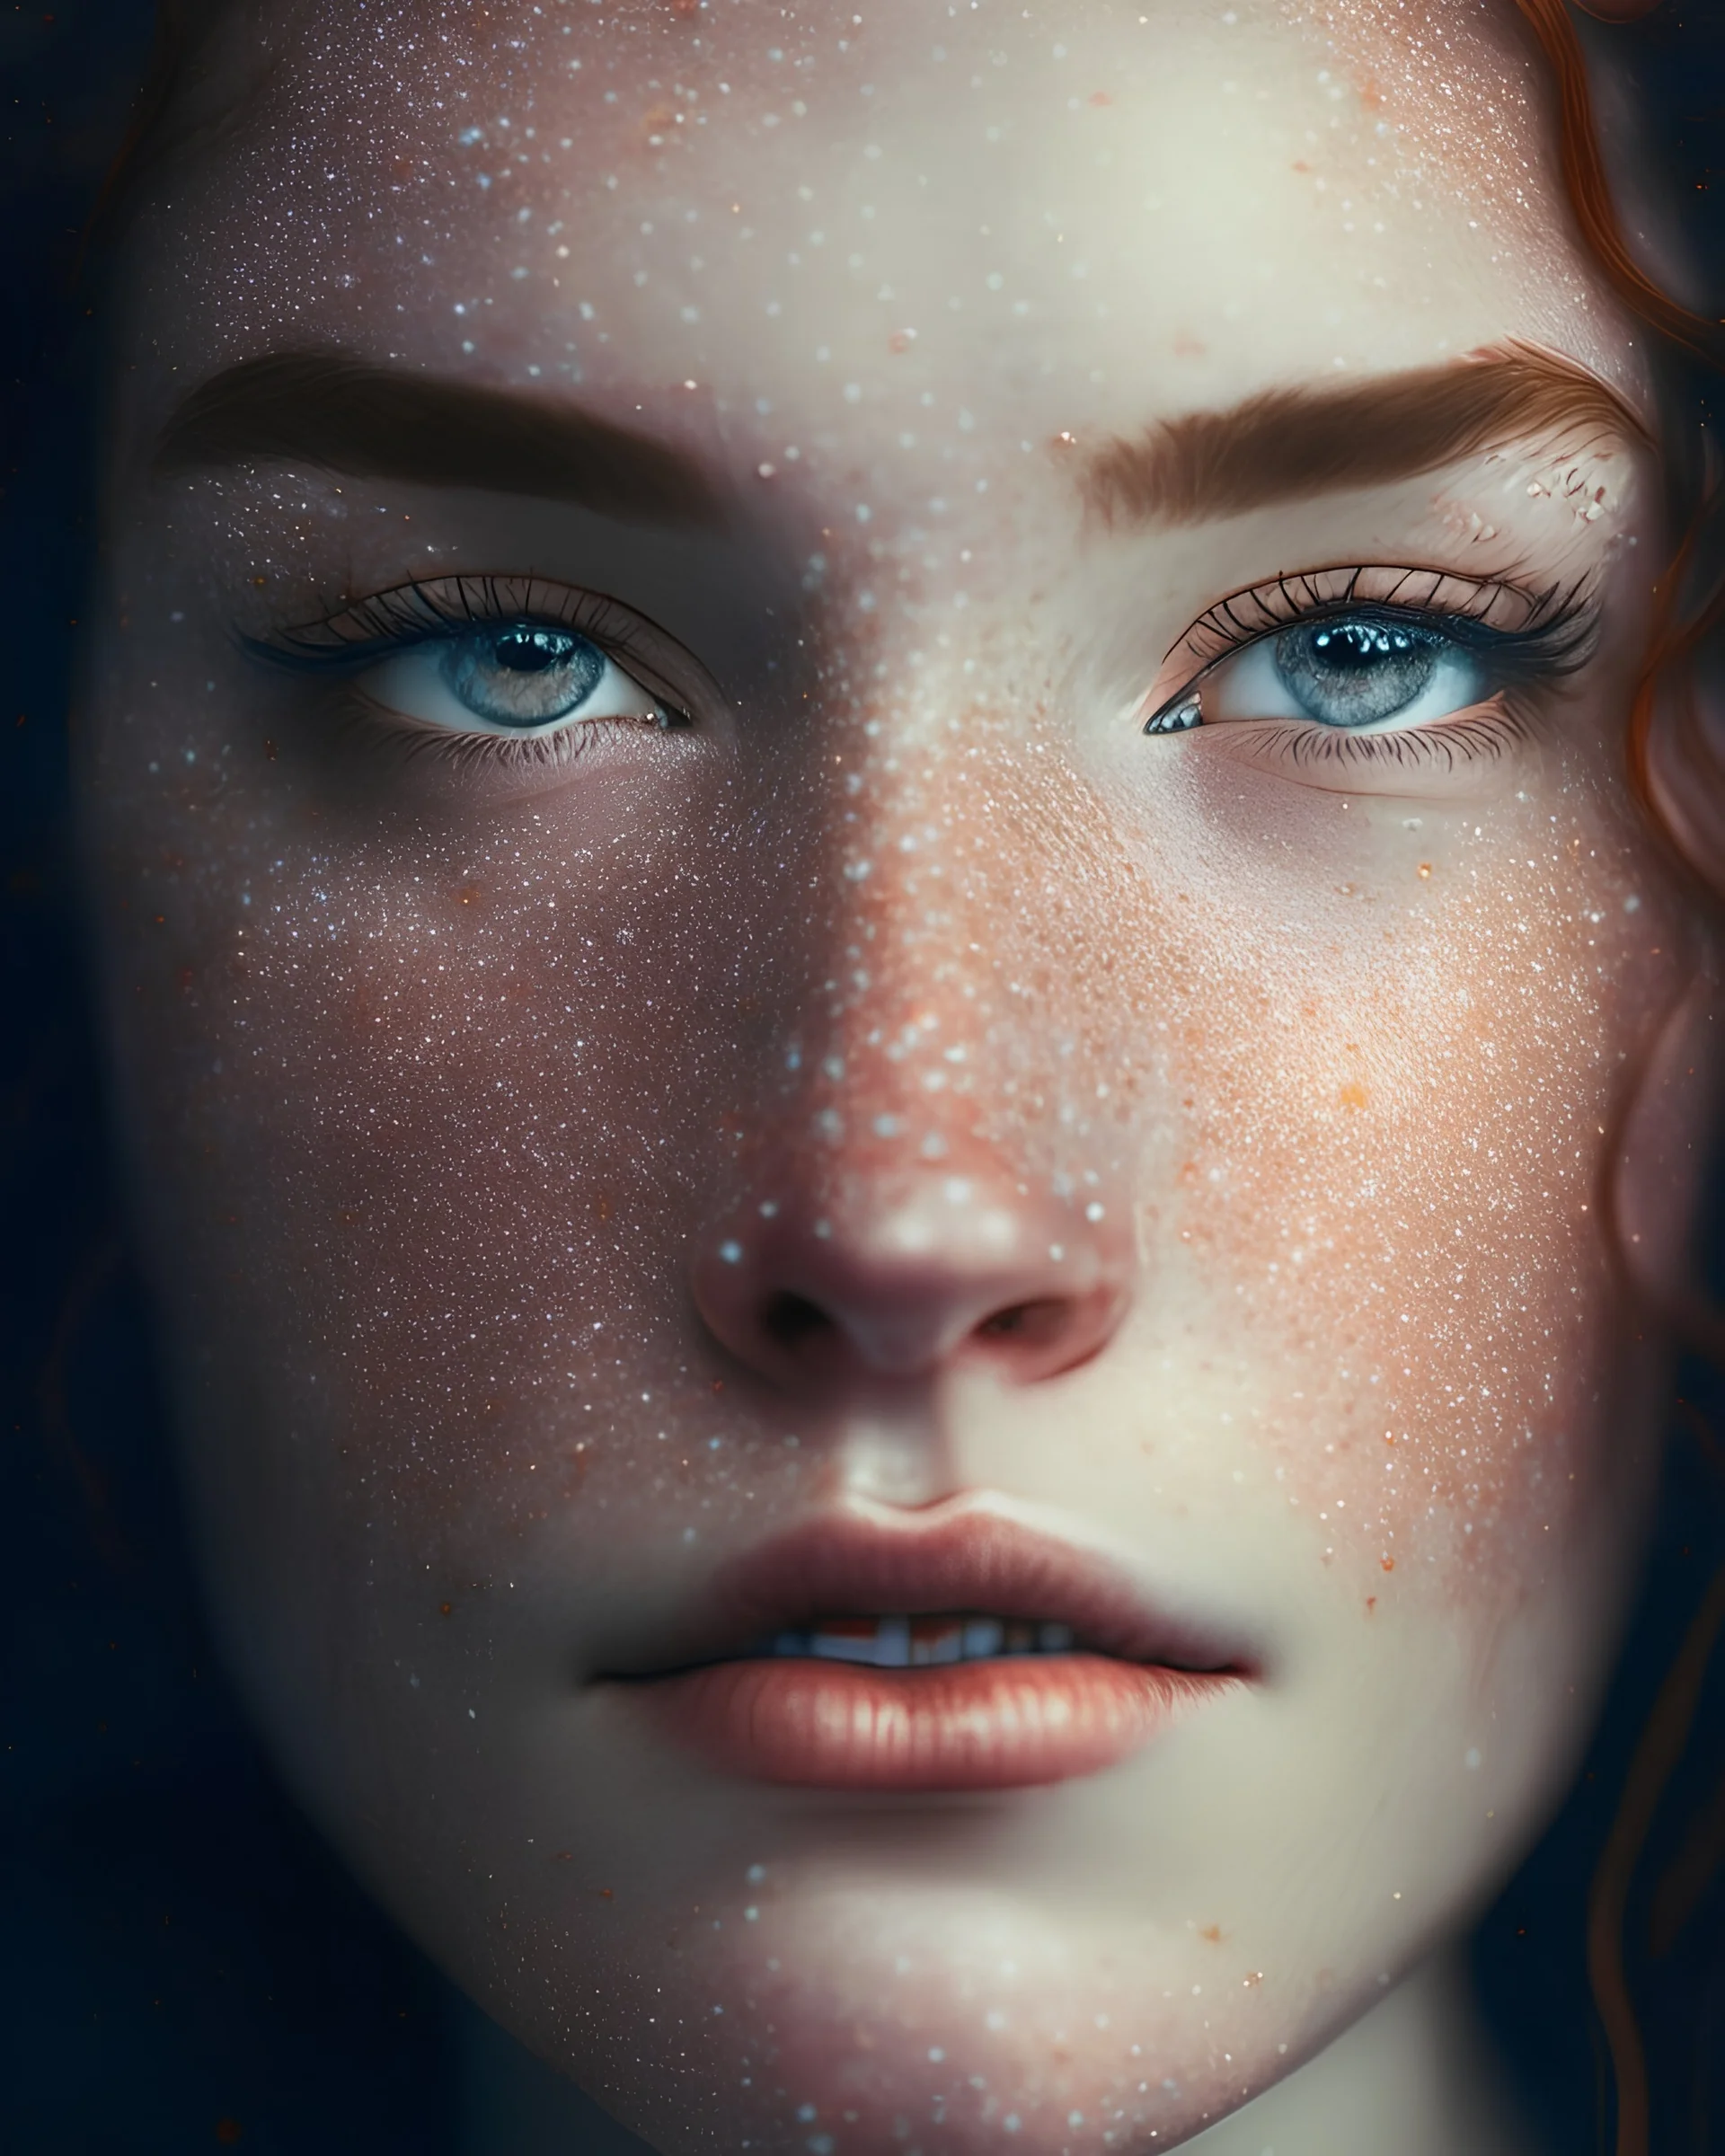 A close-up portrait of a woman with a cascade of freckles, resembling a constellation of stars across her face, highlighting the enchanting beauty of her natural features.